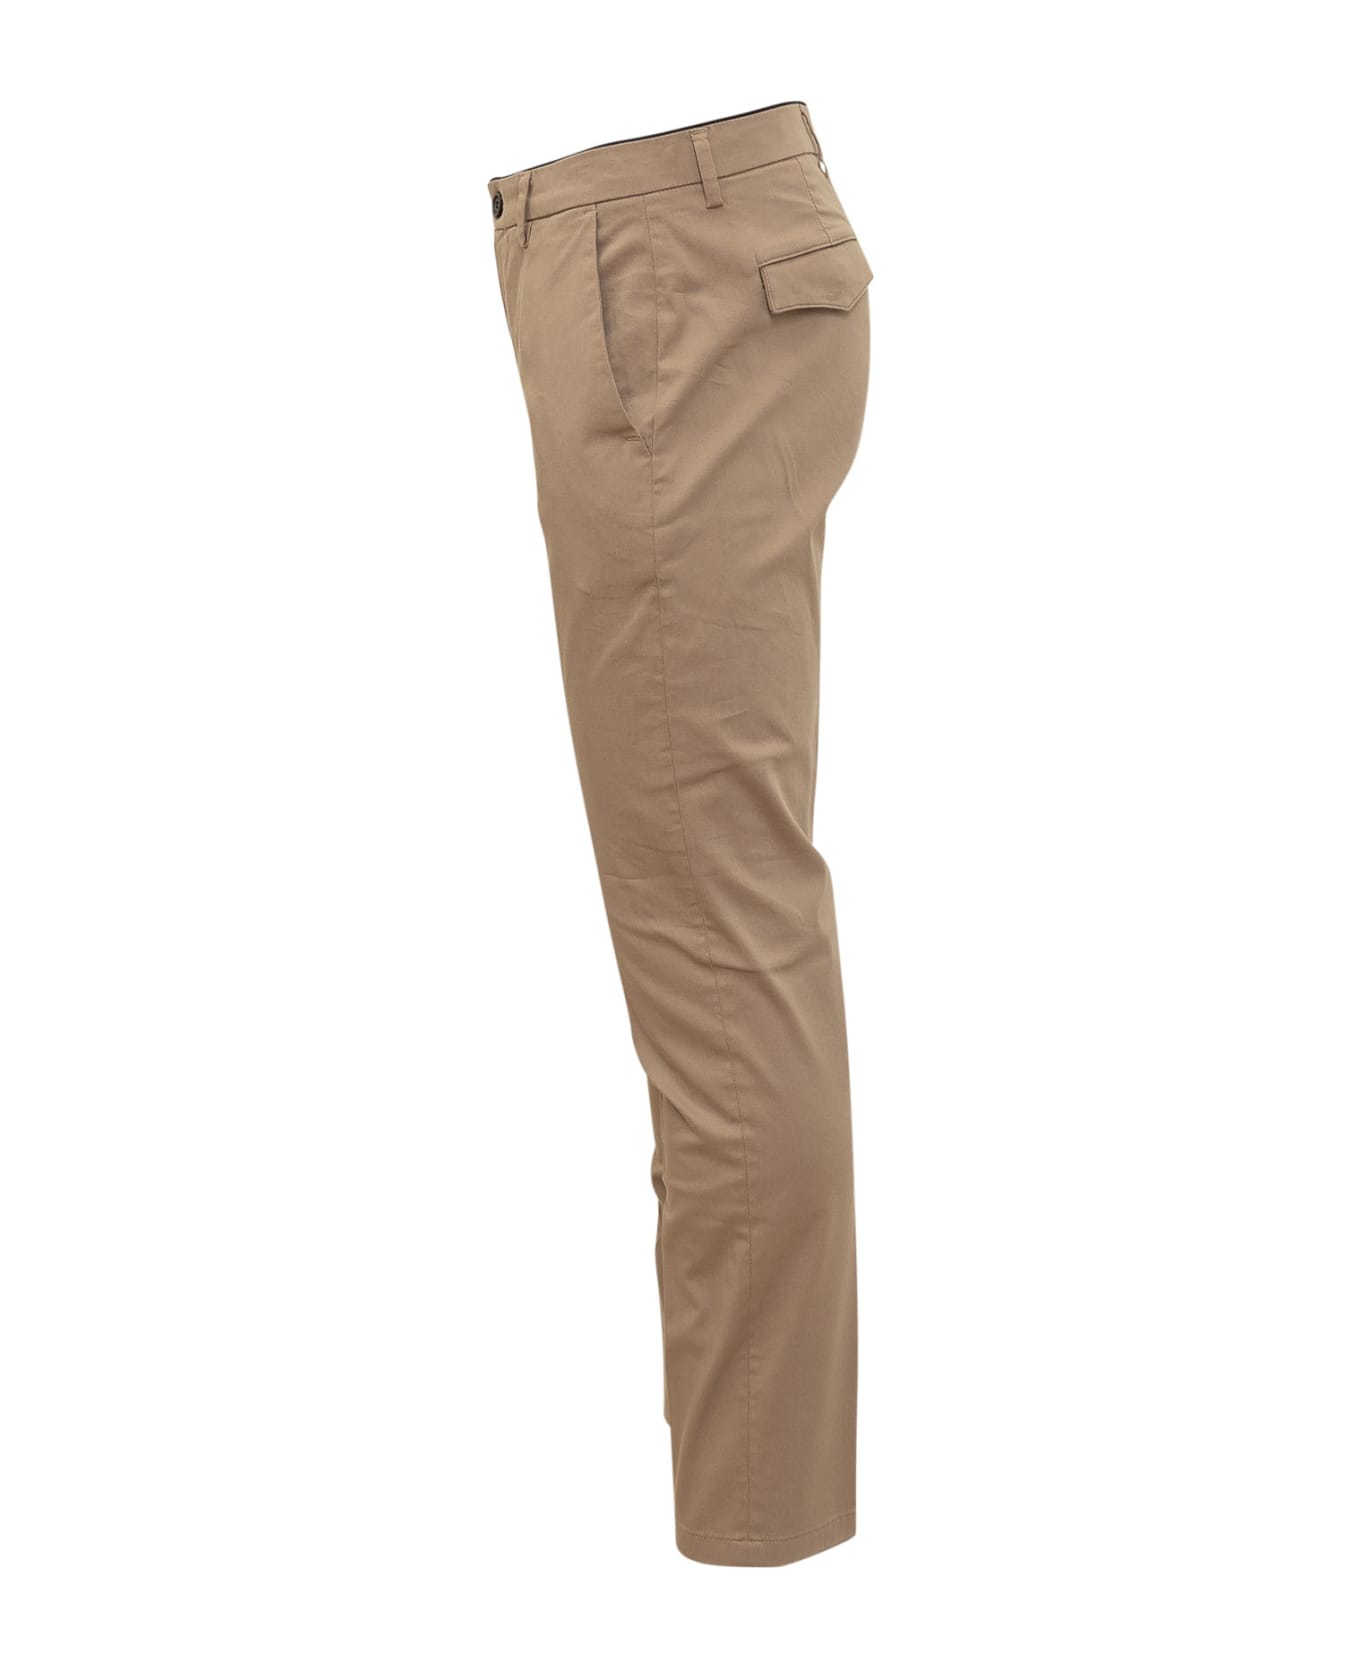 Department Five Prince Chino Pants - BEIGE